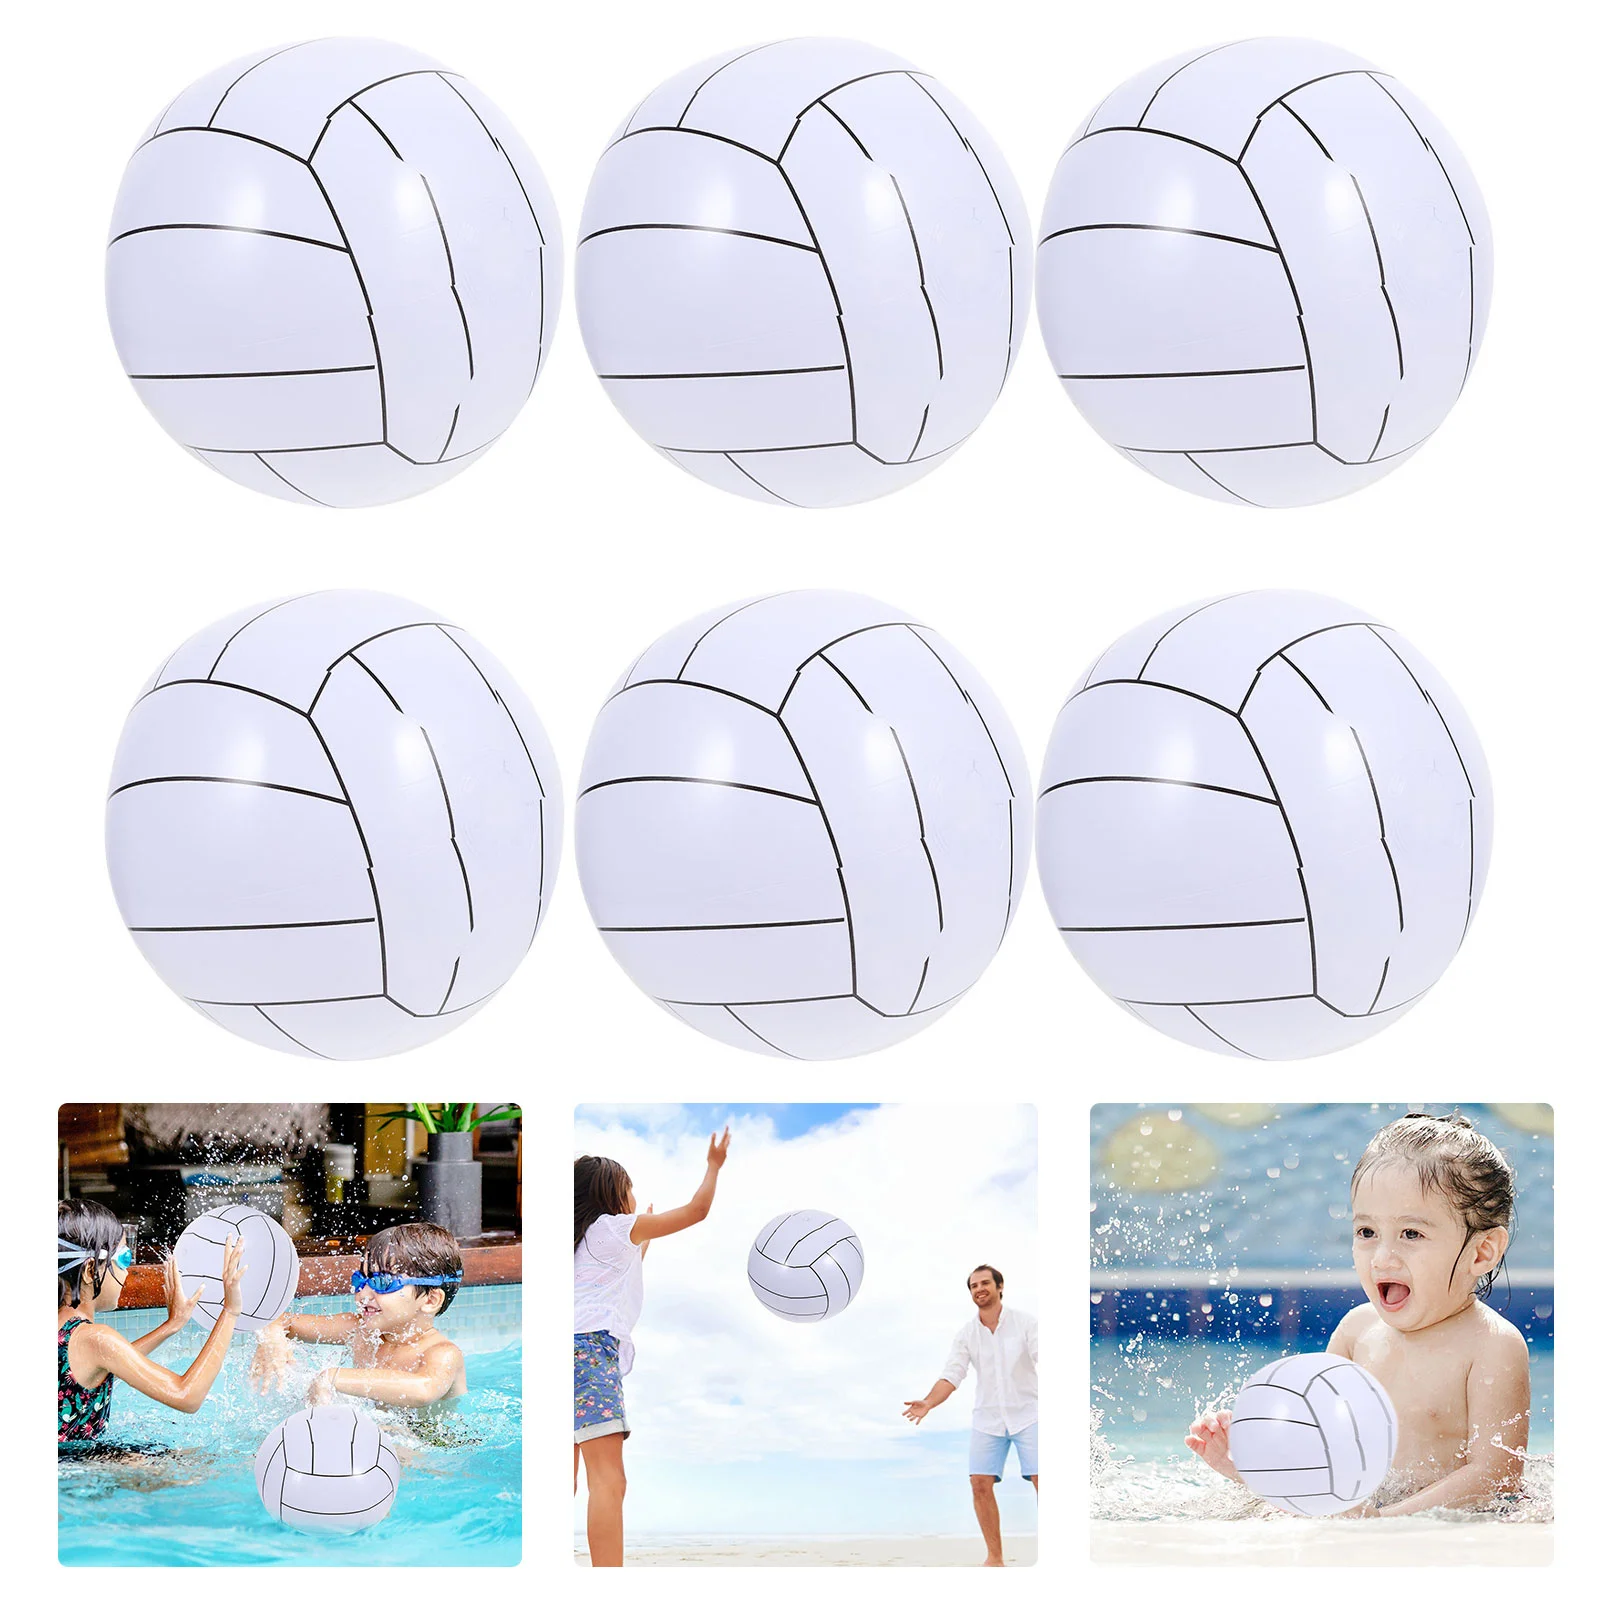 

Inflatable Beach Ball Sports Balls Summer Floating Teens Water Playing Toy Volleyball